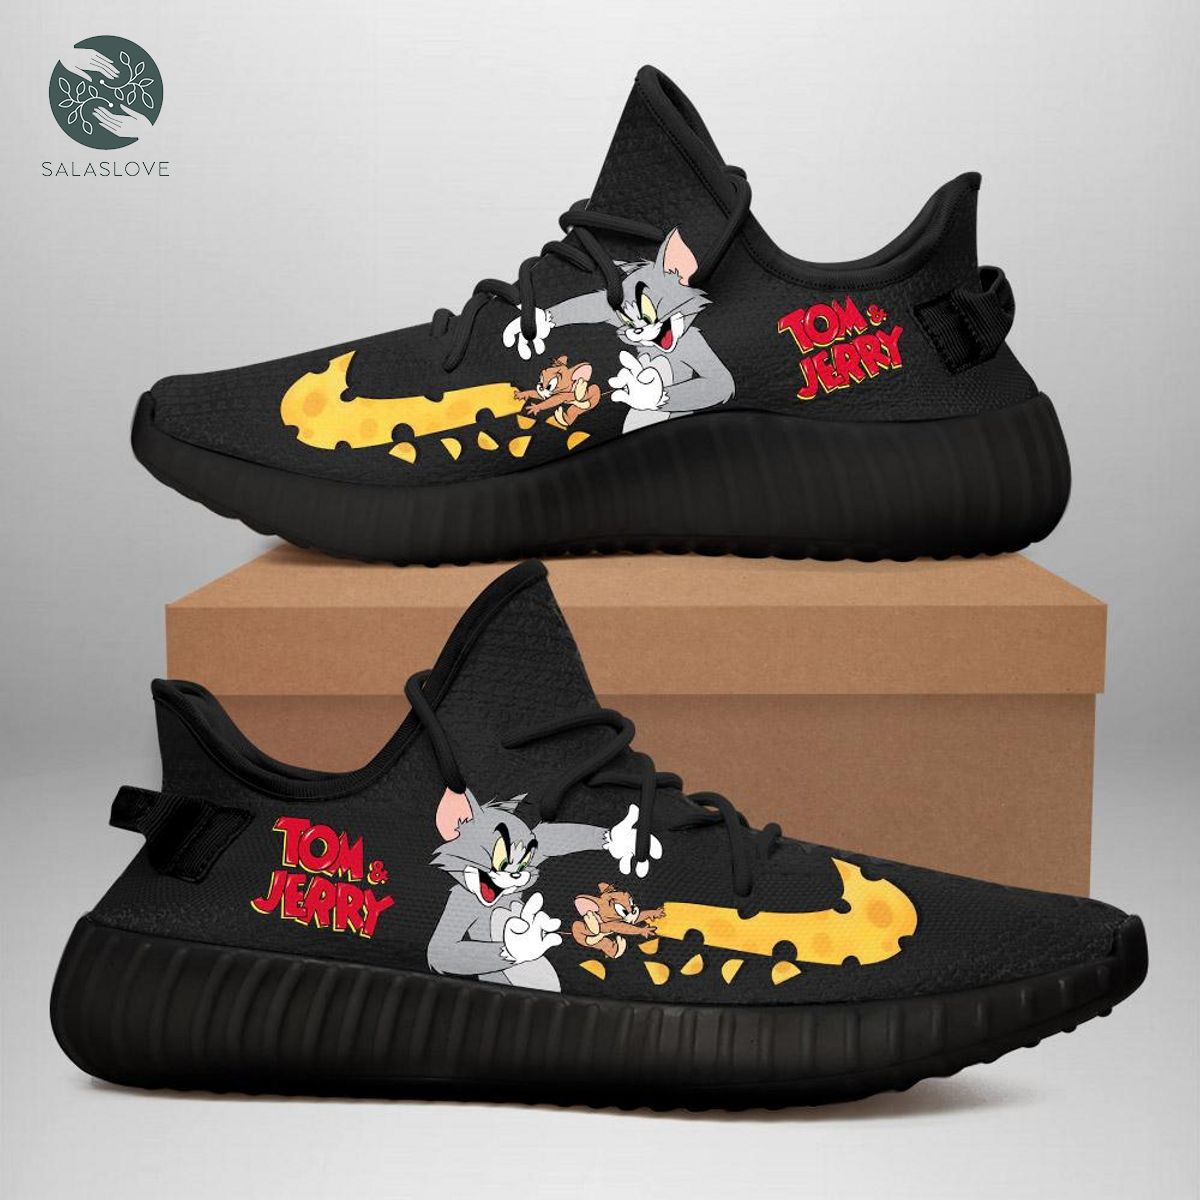 Tom and Jerry Yeezy Shoes Limited Edition Sneakers